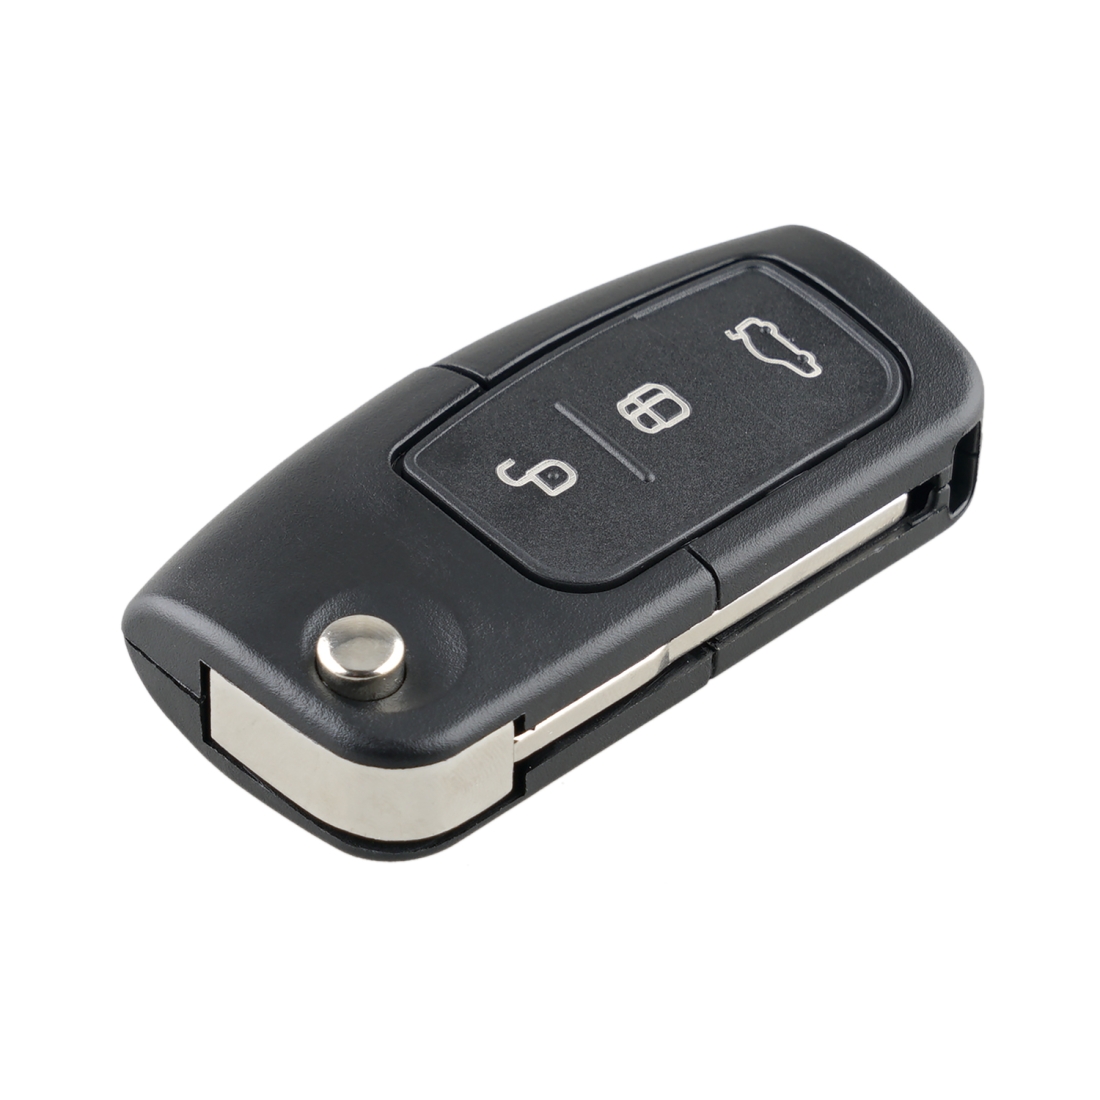 Are remote keyless entry systems more secure than traditional car keys?